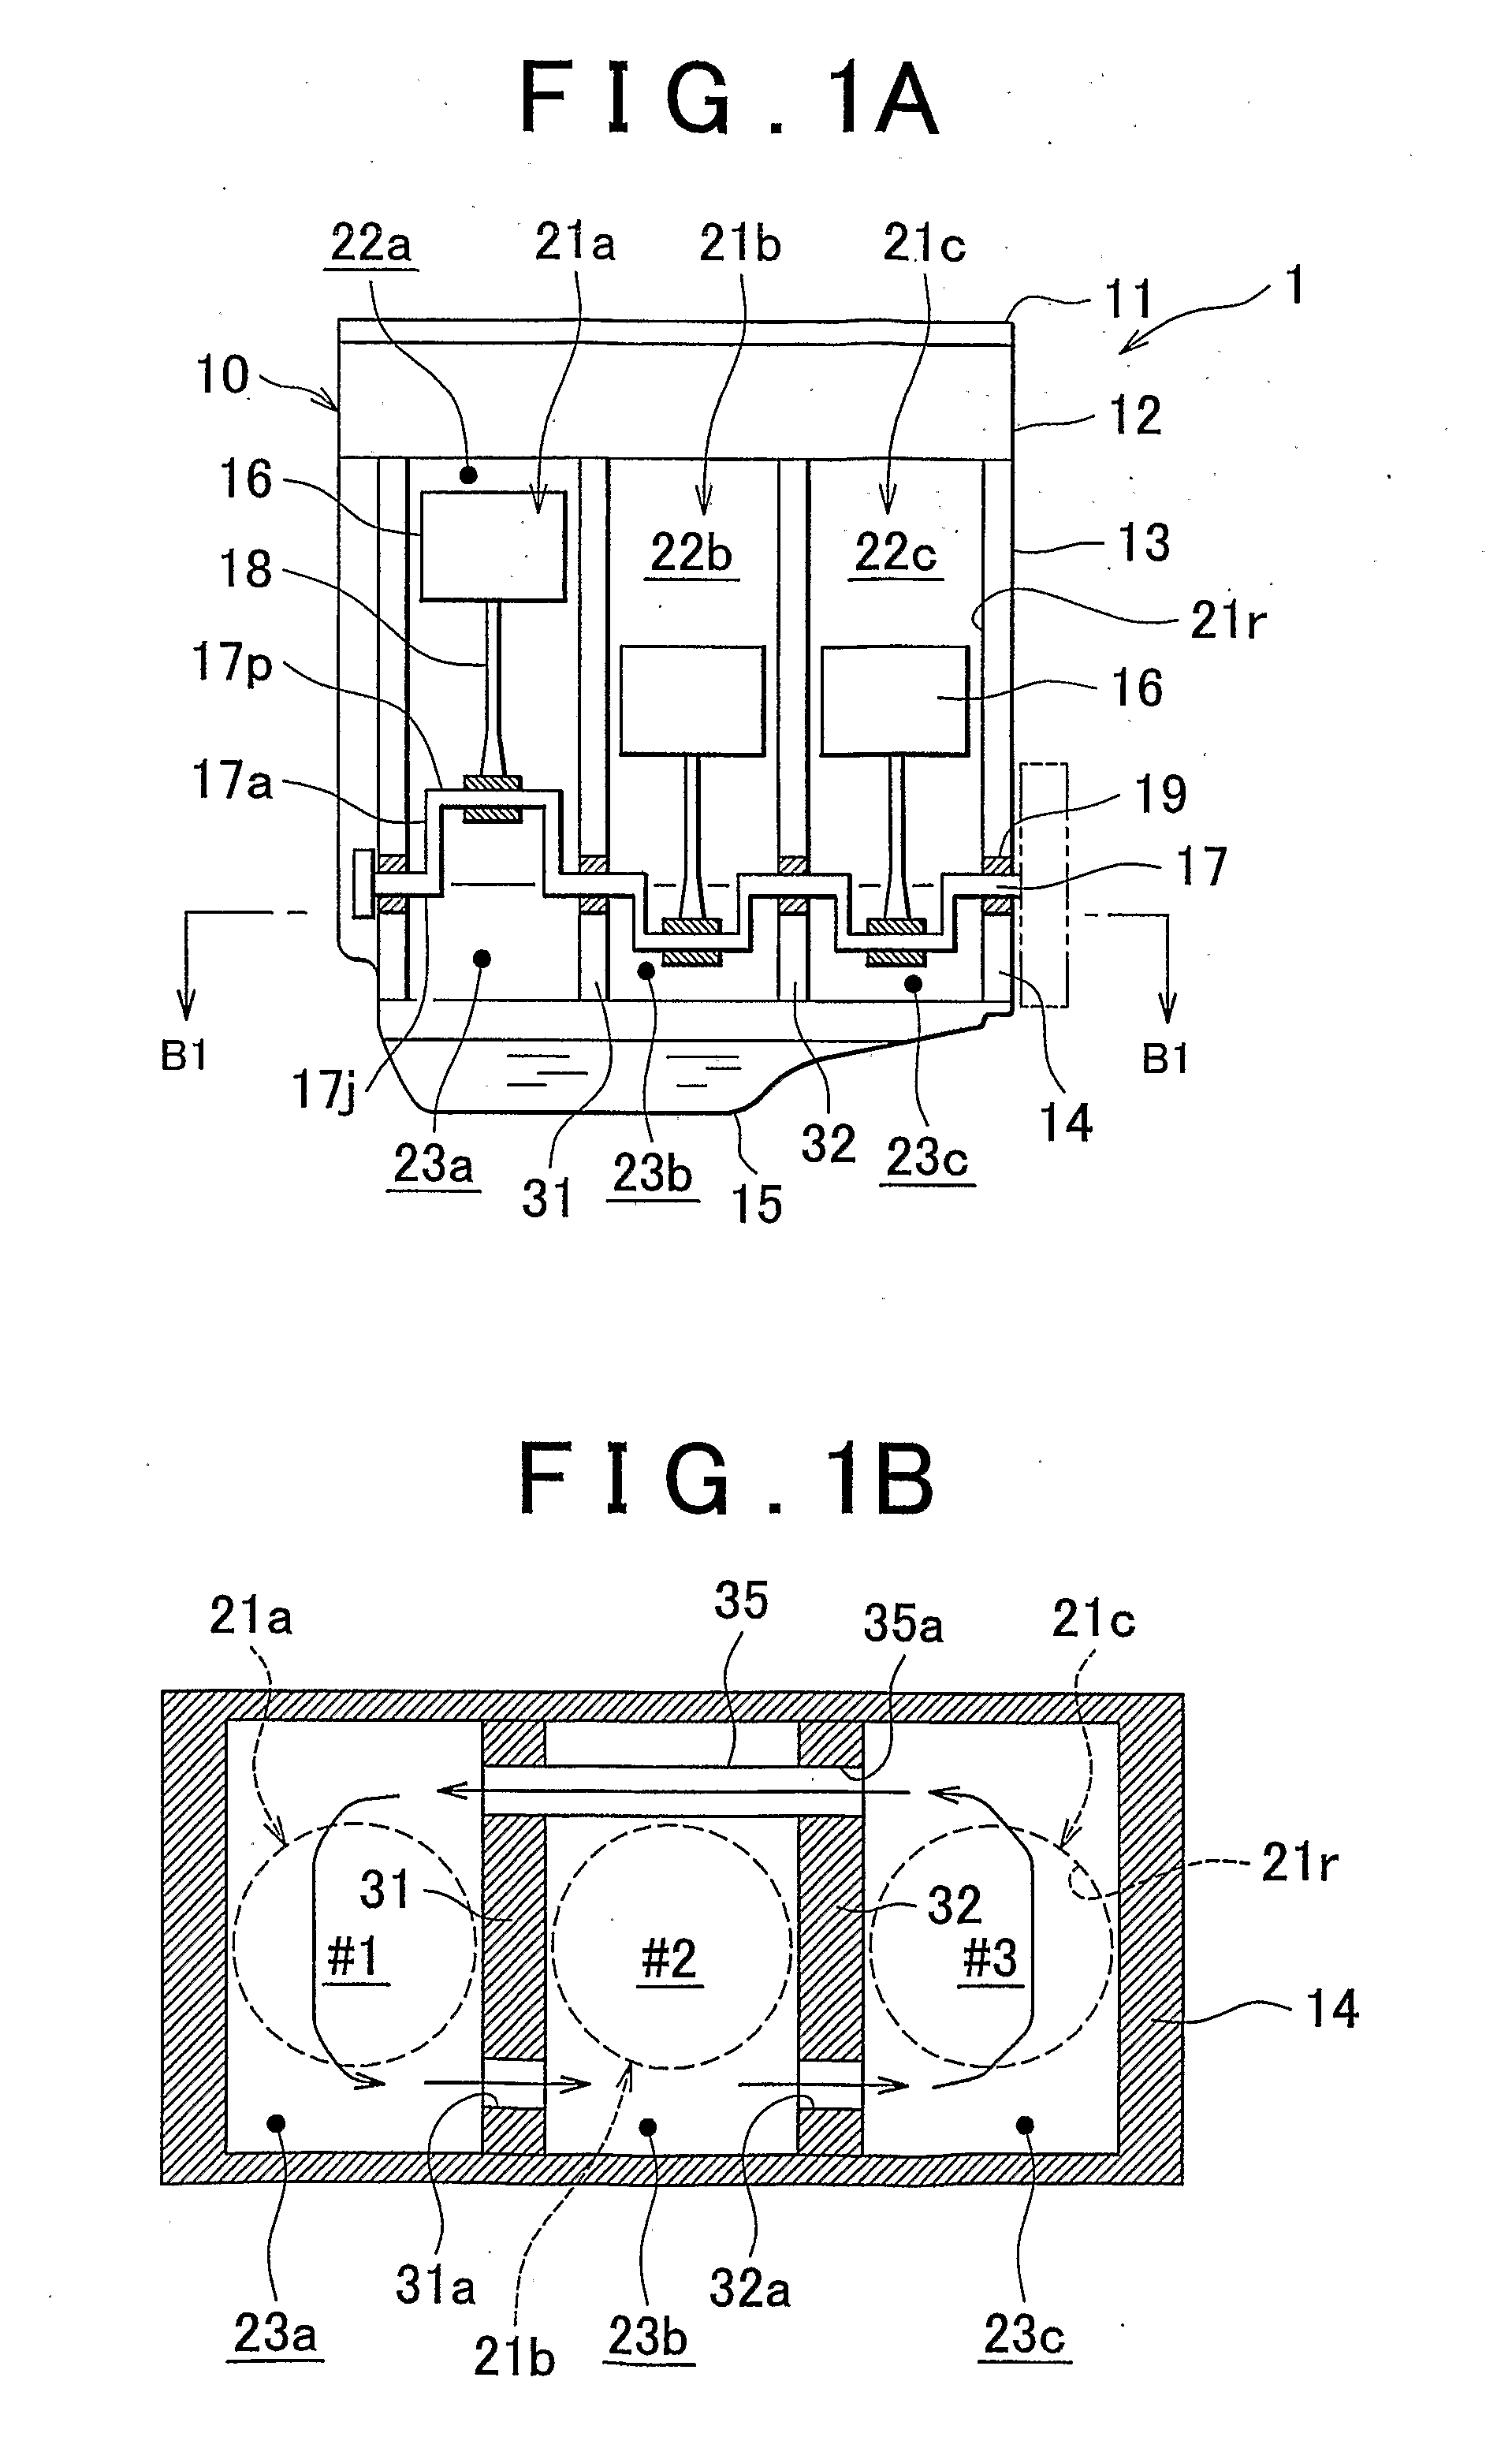 Crank chamber communication structure of multi-cylinder internal combustion engine